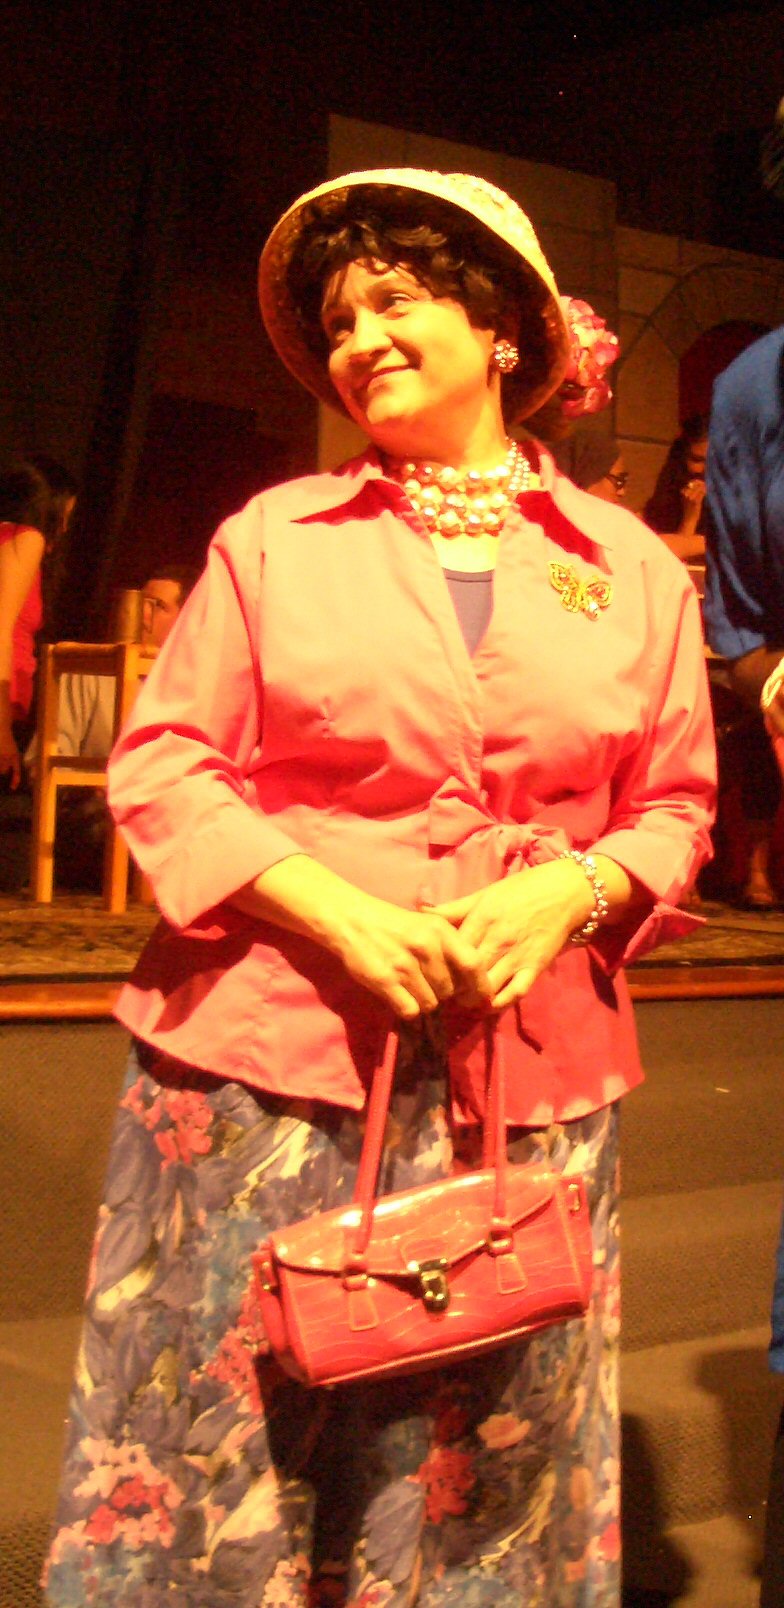 as Harriet in the stage play Next Stop Broadway, in Pasadena, California 2009